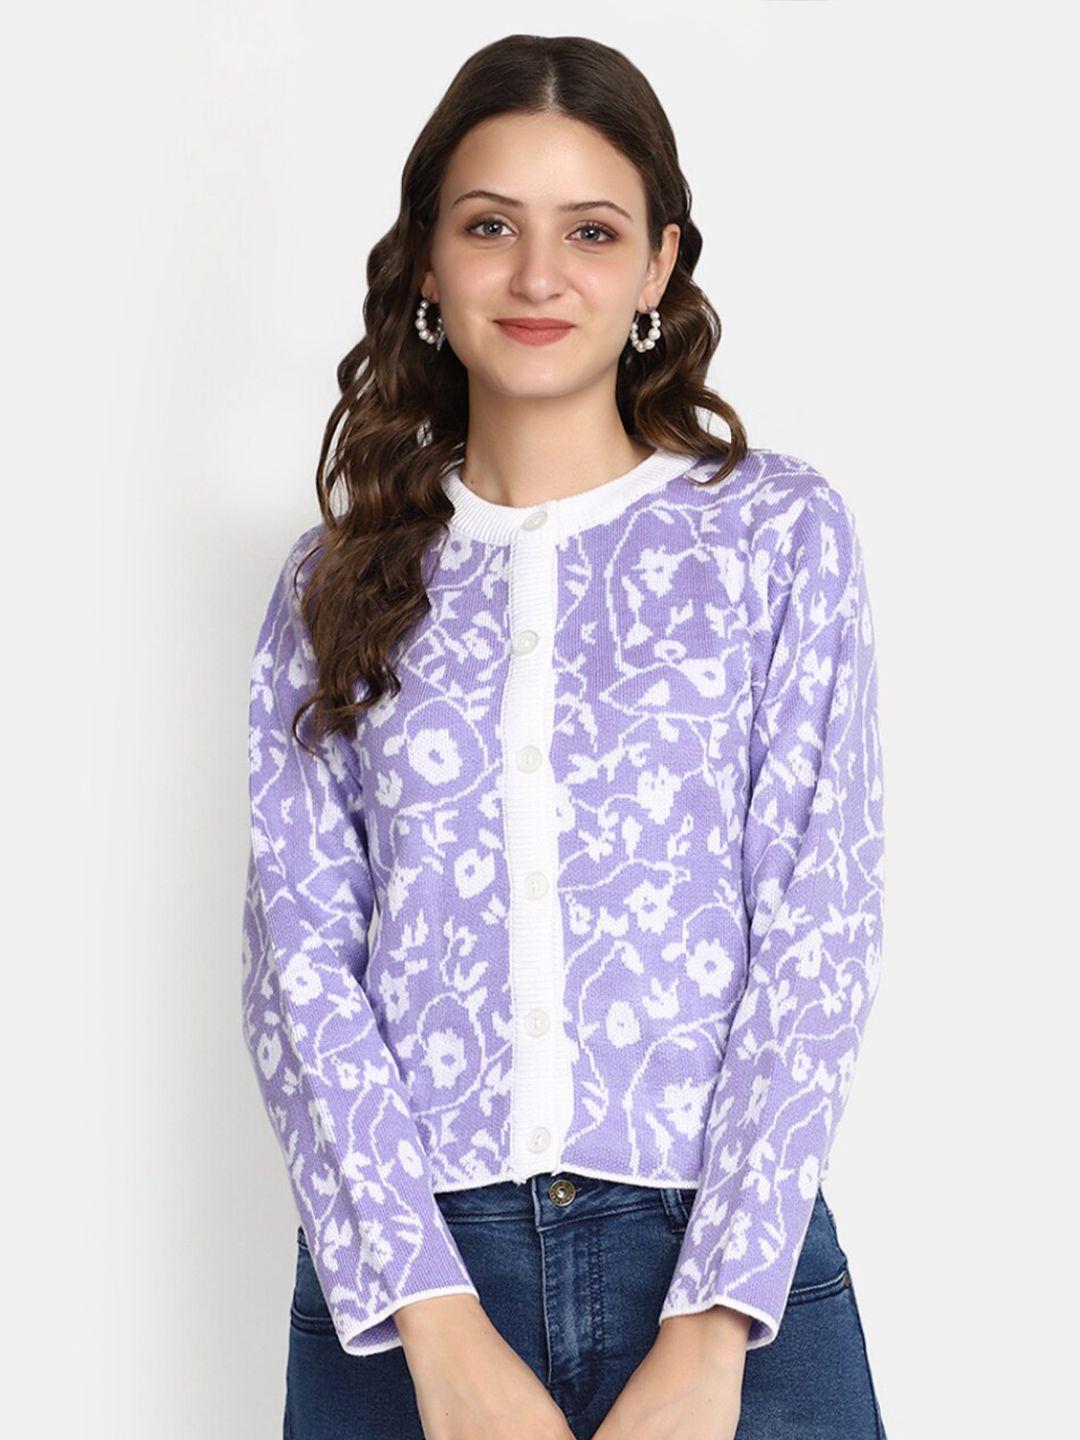 v-mart floral printed acrylic cardigan sweater